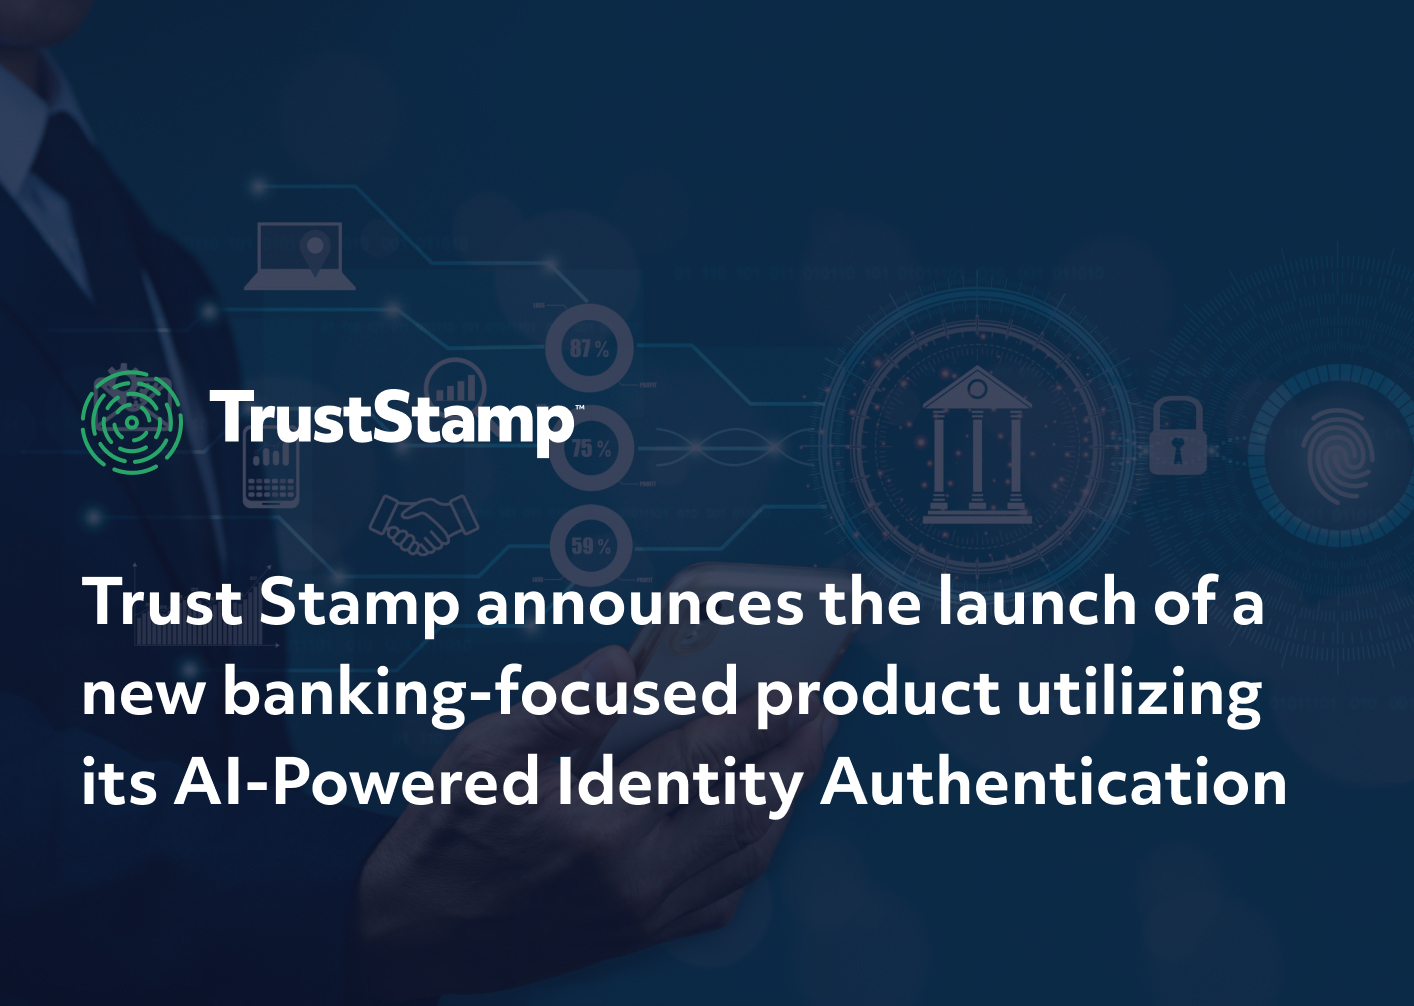 trust-stamp-announces-the-launch-of-a-new-banking-focused-product-utilizing-its-ai-powered-identity-authentication